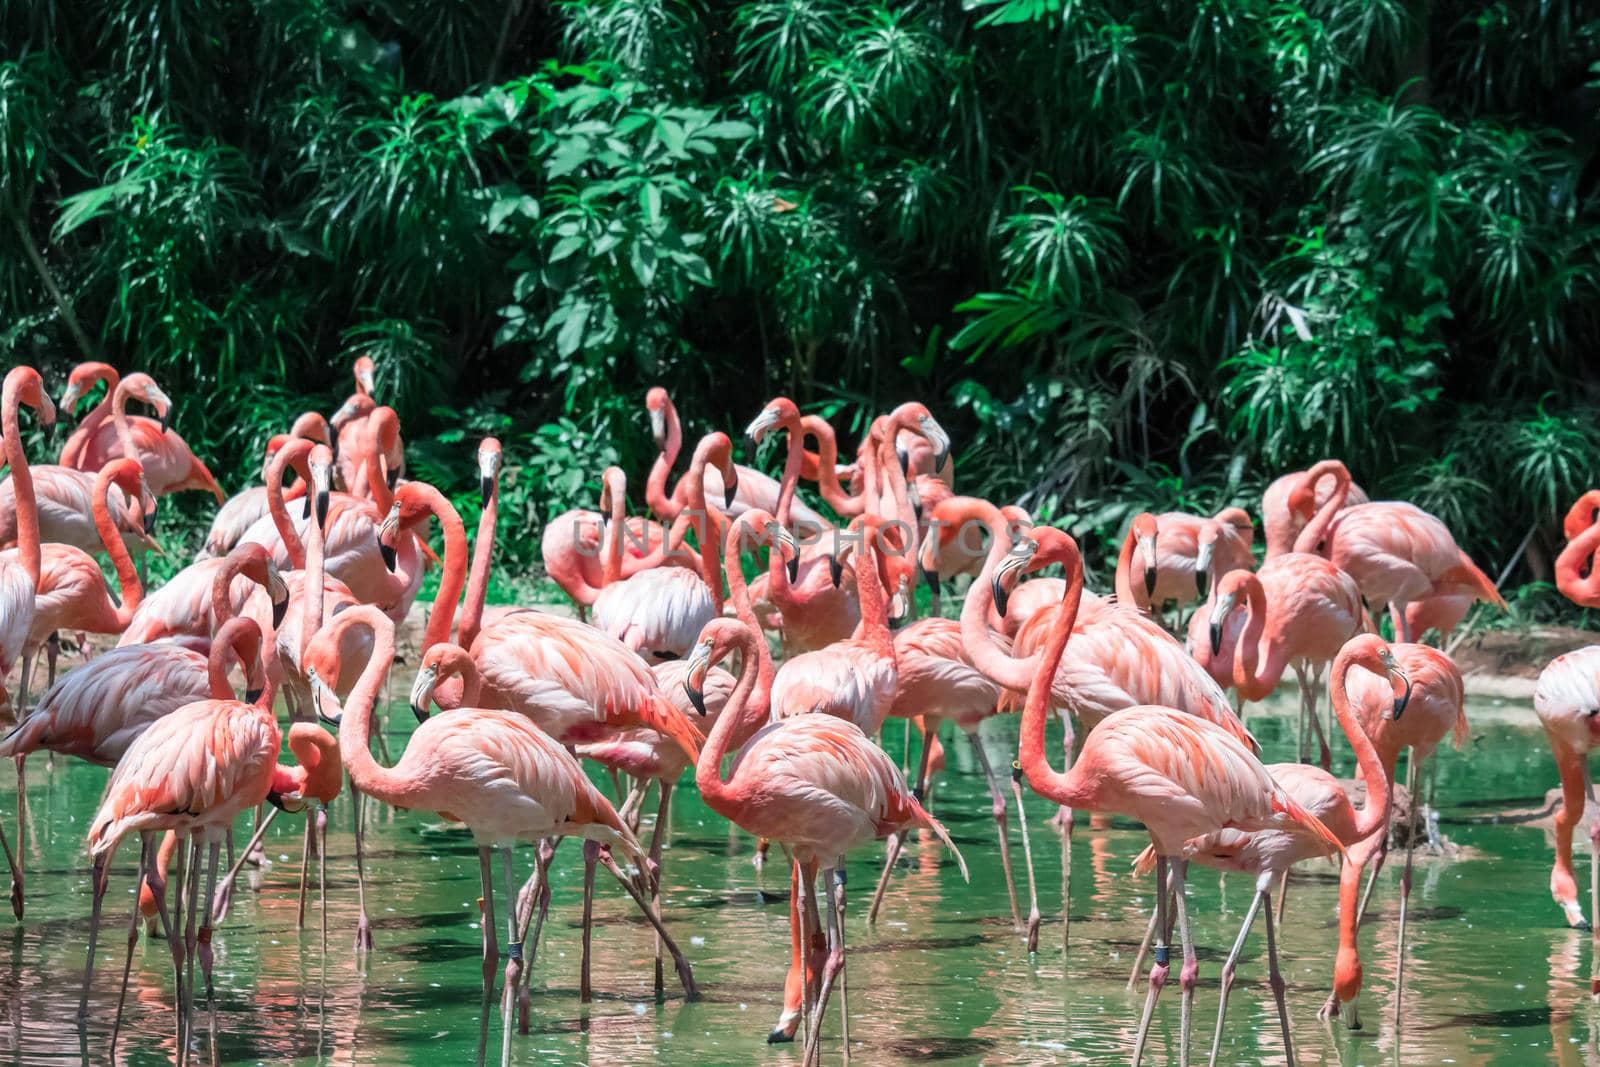 A Flock of Pink Caribbean flamingos in water